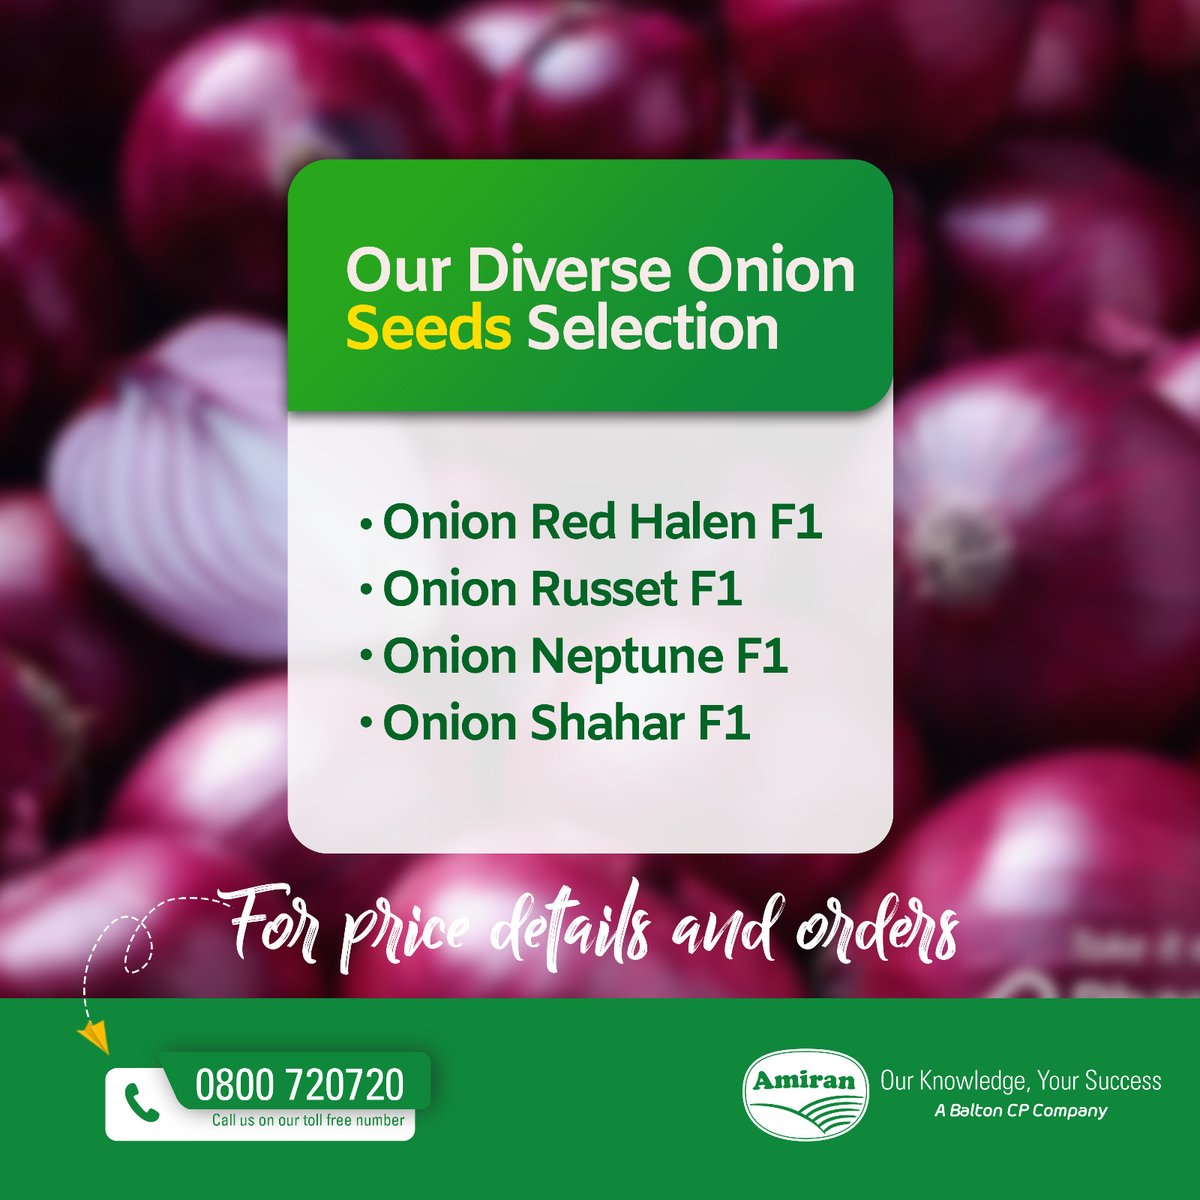 Which onion variety do you like growing? Here is the Amiran diverse onion selection tailored for your agricultural needs: 1. Onion Red Halen F1: 2. Onion Russet F1: 3. Onion Neptune F1: 4. Onion Shahar F1: For pricing details and orders, call us toll-free on 0800720720.